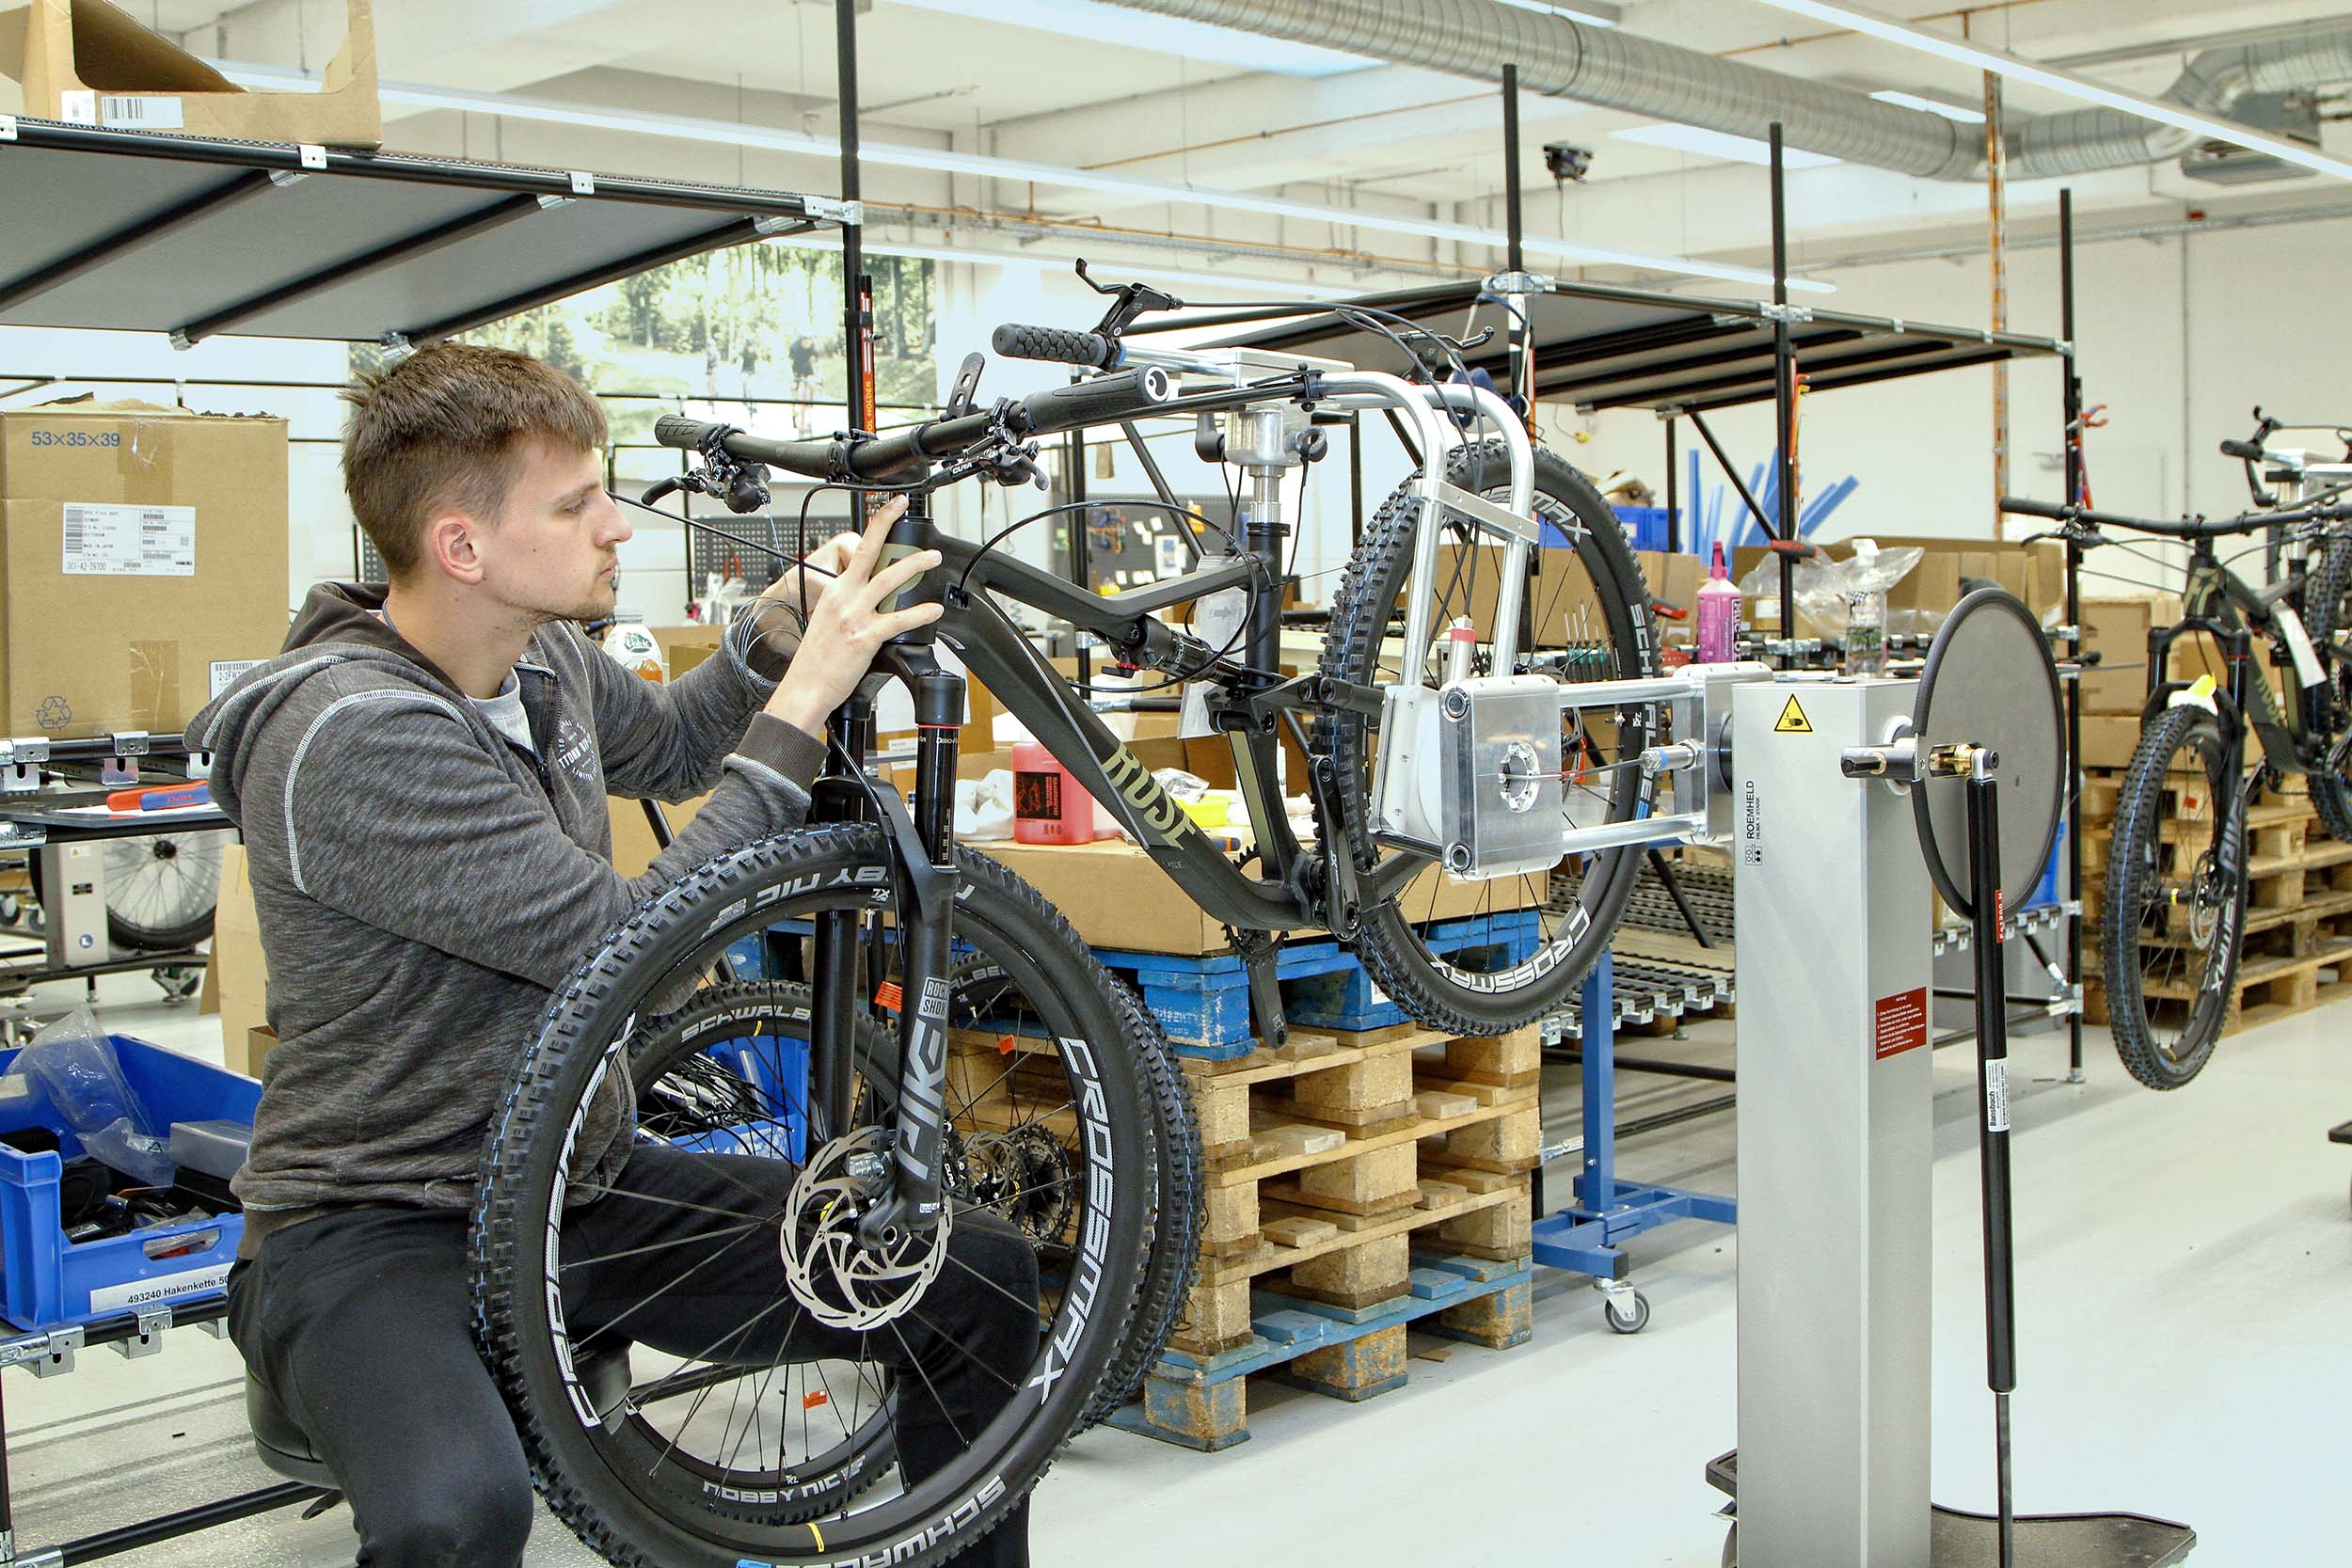 Roemheld Bike Promobils in action at the Bocholt factory of Rose Bikes. Note how the bicycle is secured via the seat tube rather than the frame.